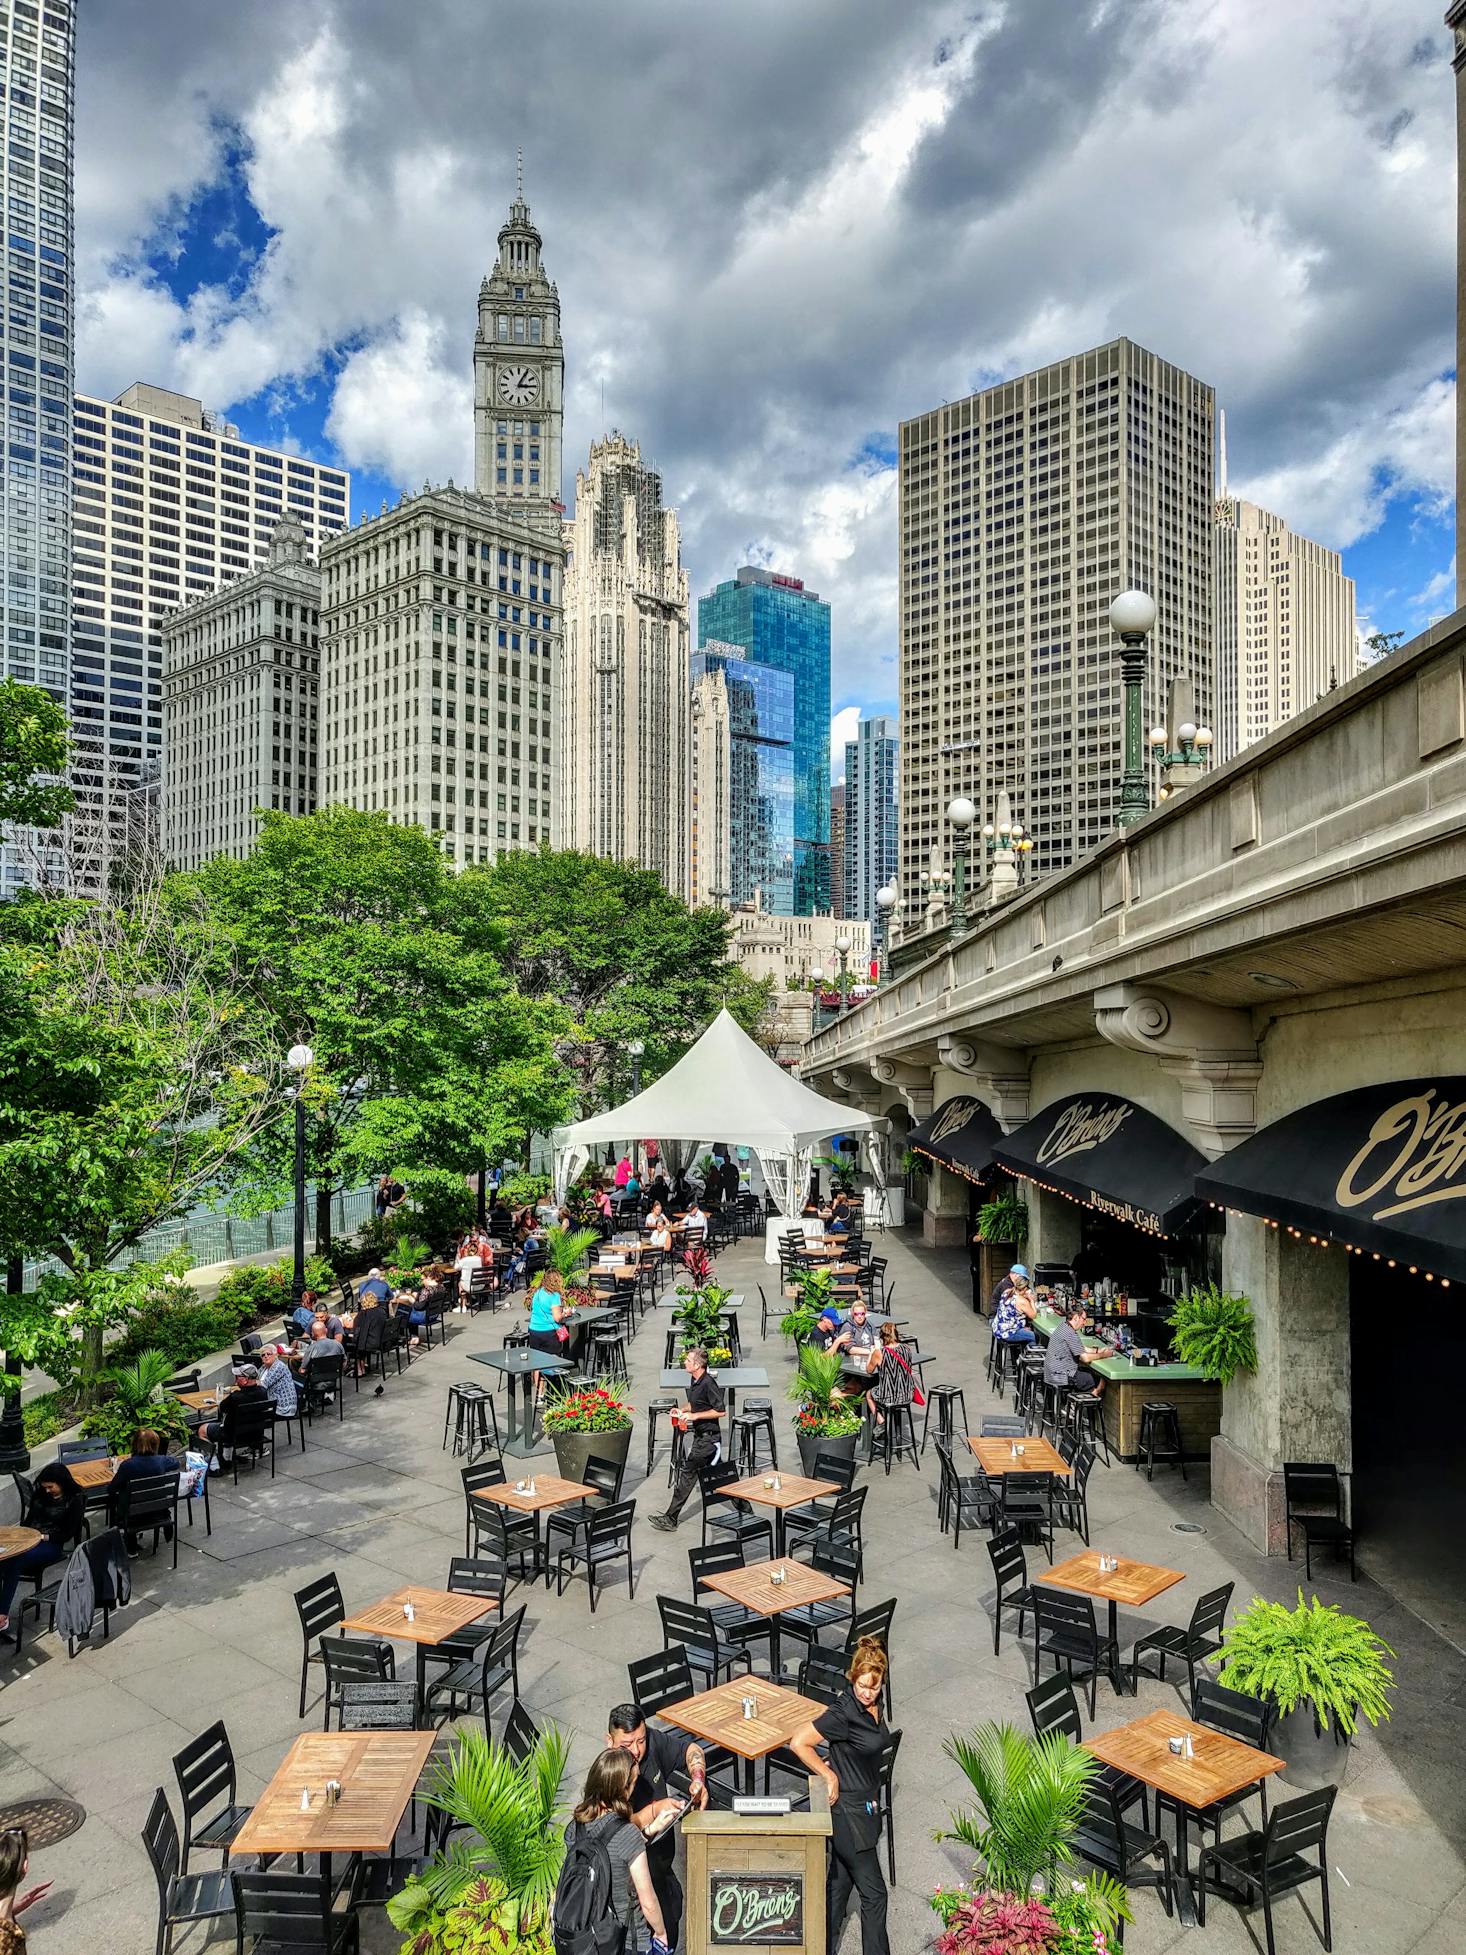 Romantic outdoor dining in Chicago